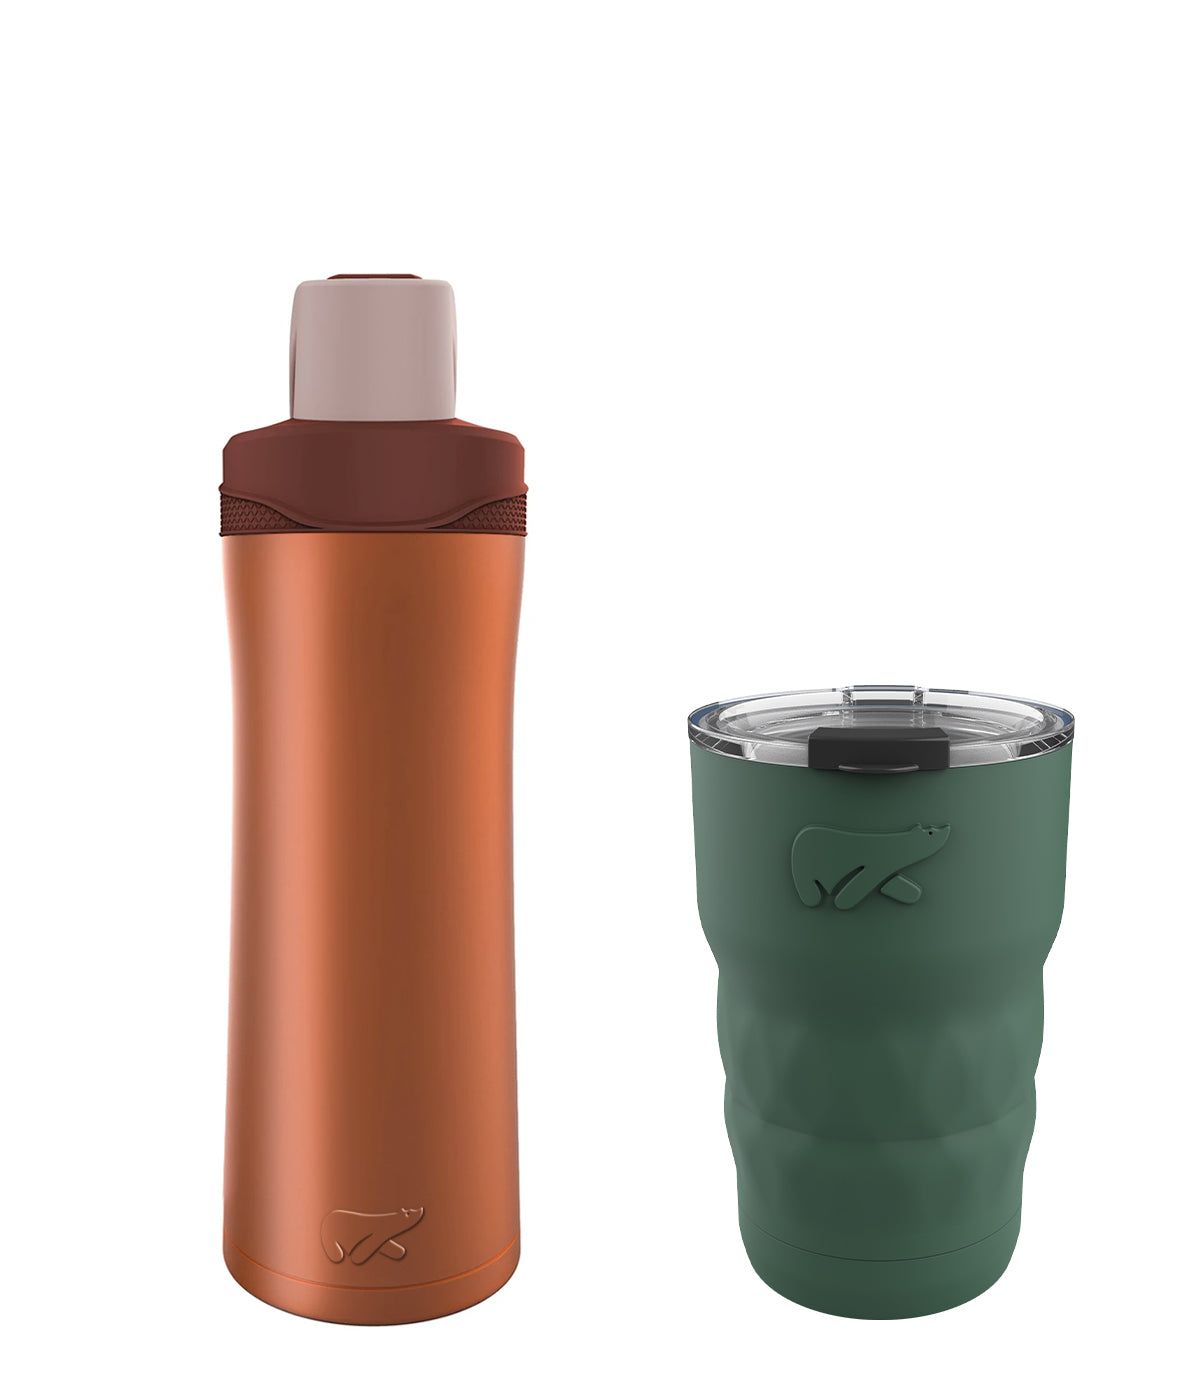 Chilled Hydration Combo (Java Coffee Mug 360 ML Green + Minsk Insulated Bottle 550 ML - Coral)